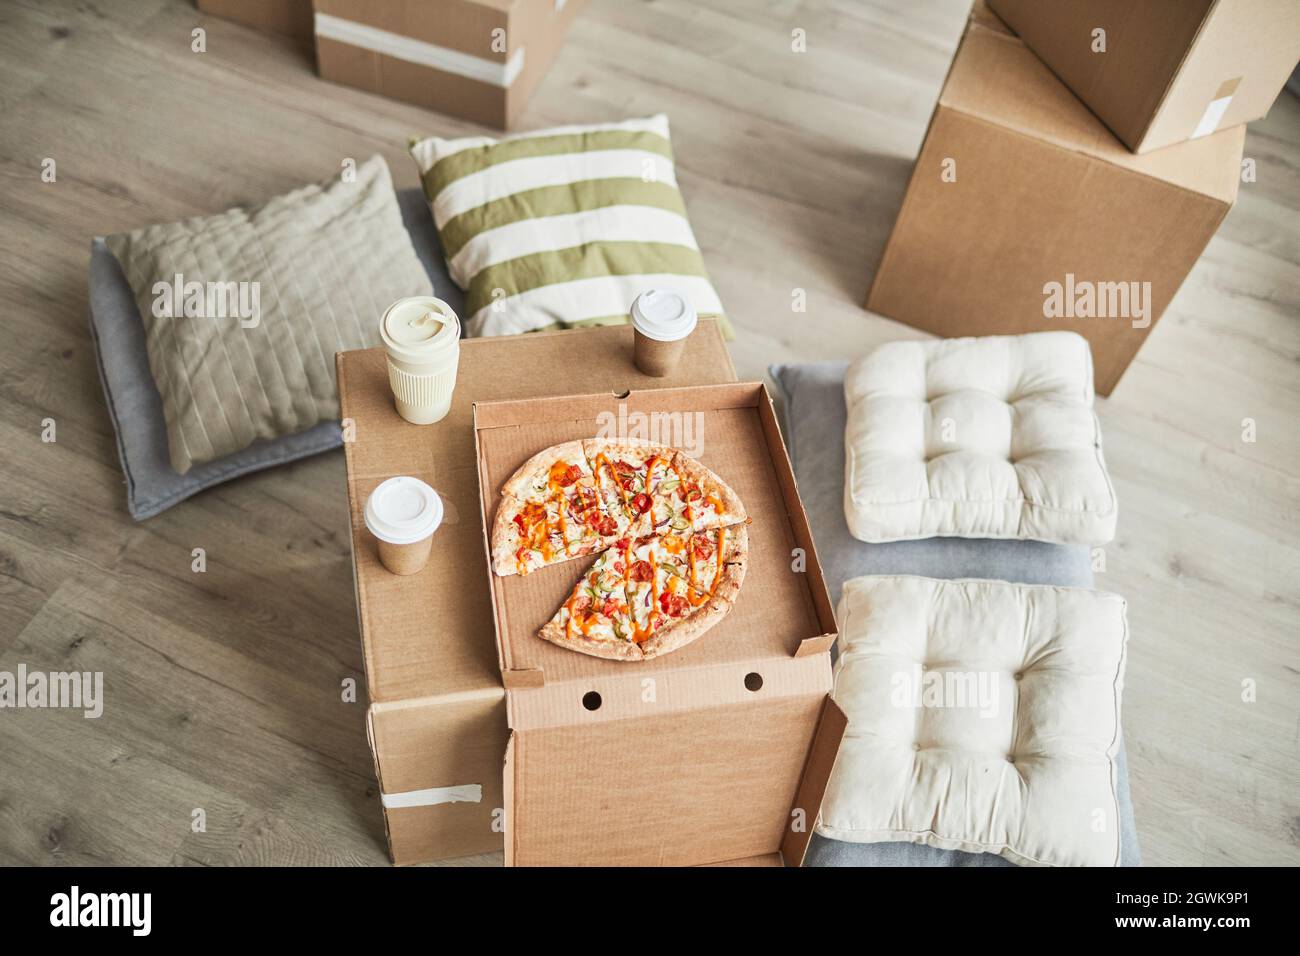 Top view background image of pizza on cardboard box as makeshift table in empty room while family moving in to new house, copy space Stock Photo